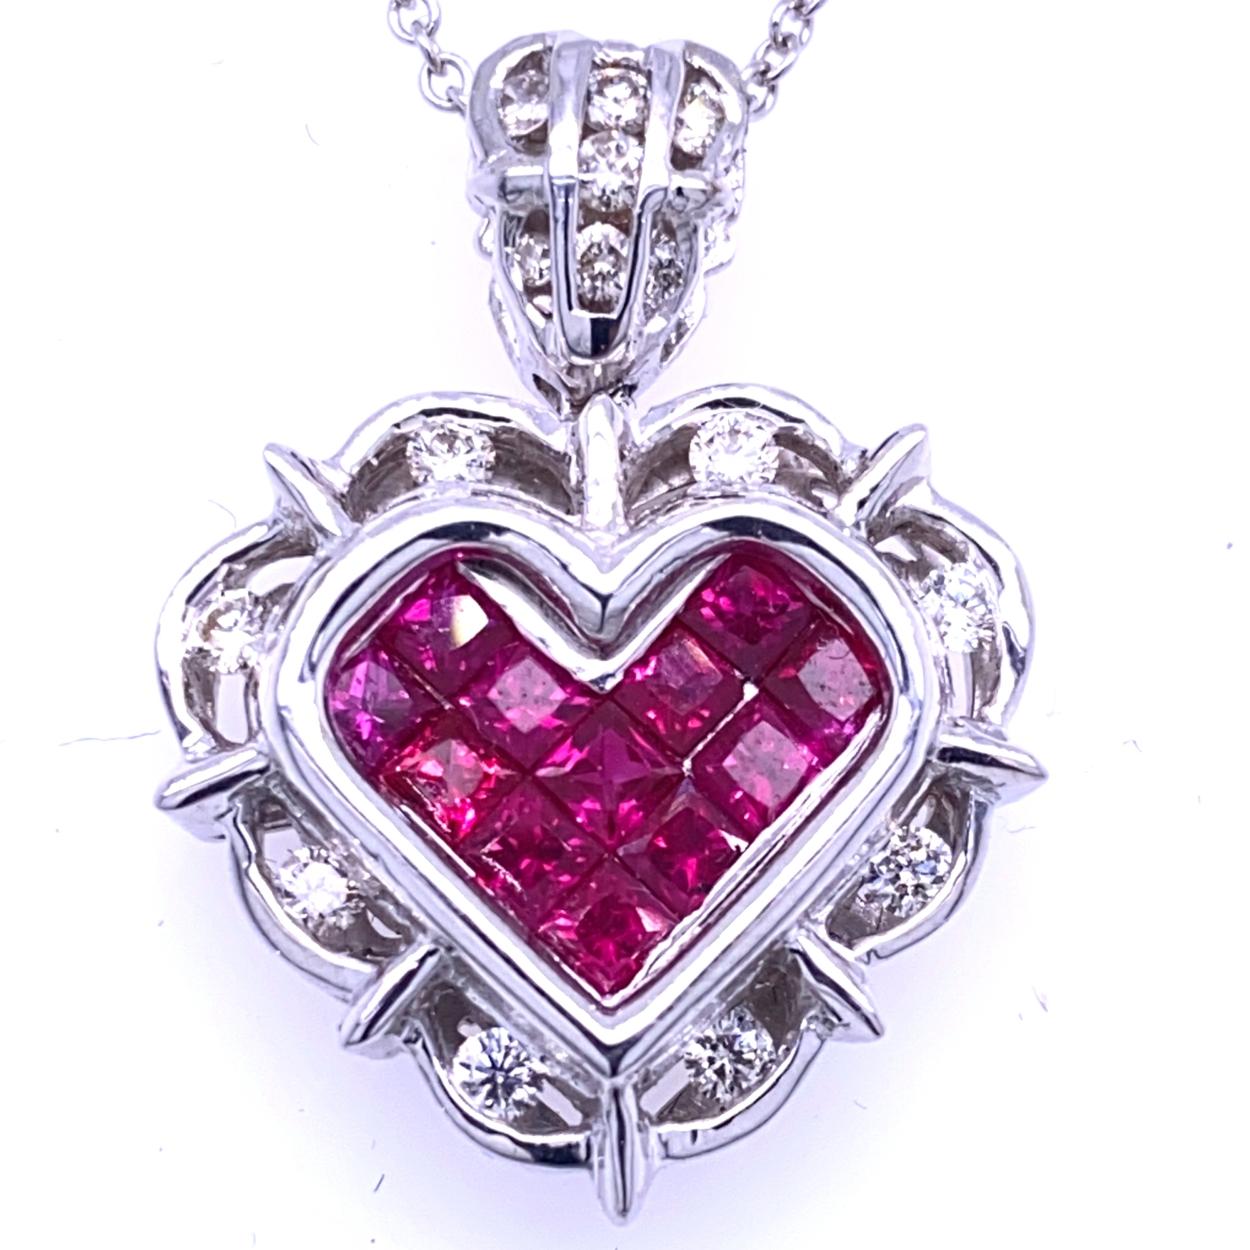 18K Gold Heart shaped Pendant with 12 Invisible Set Princess Cut Rubies (Total Gem Weight 1.30 Ct) surrounded by a Channel set Halo of diamonds and diamond set Bale with total weight of 0.40 Ct. 
Total Diamond Weight: 0.40 Ct
Total Gem Weight: 1.30